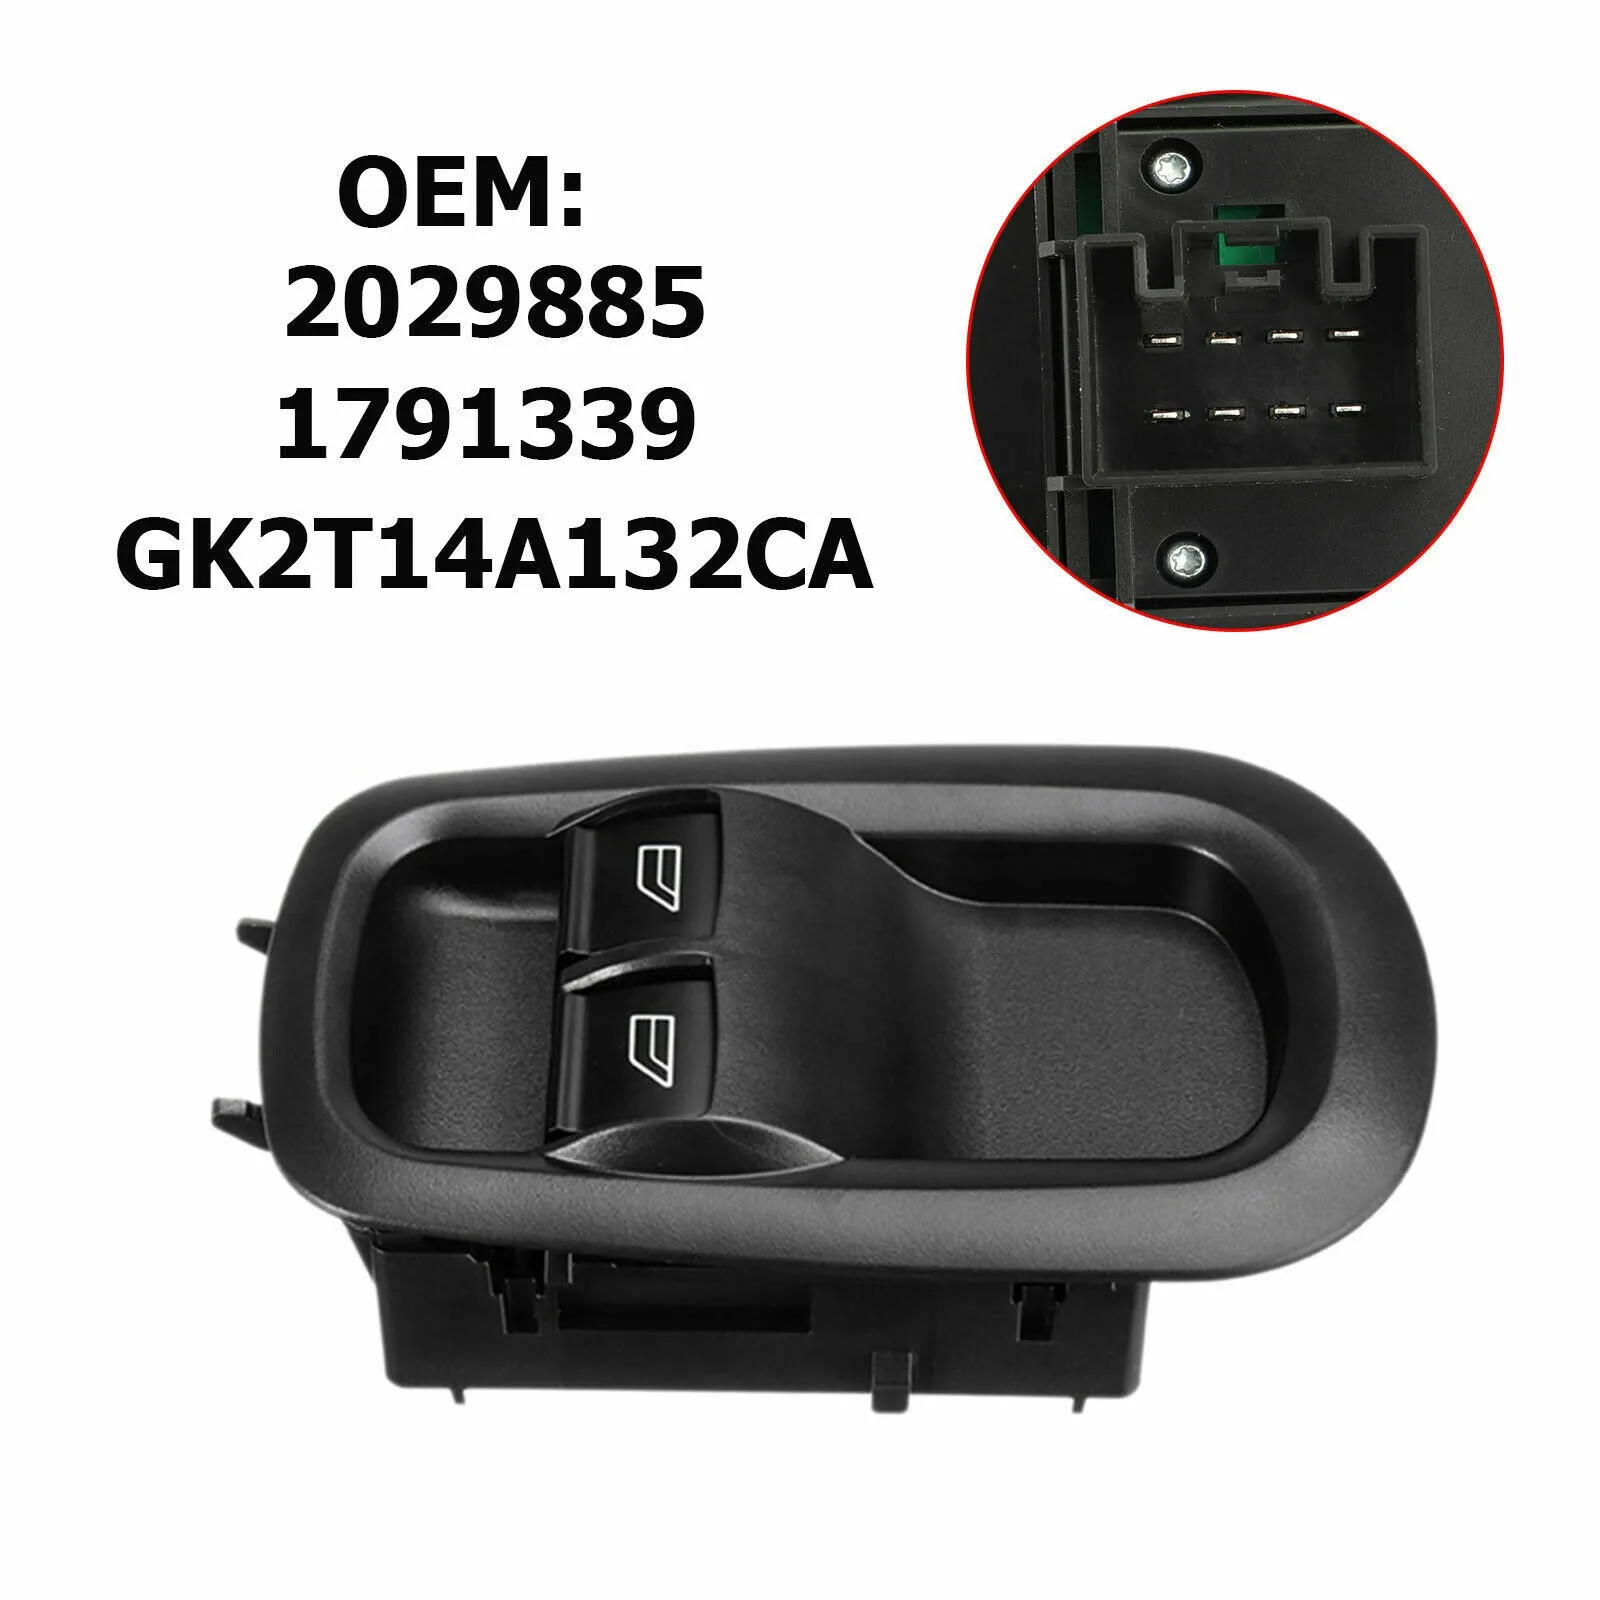 

1791339 Door Double Switch 1PC For Ford Transit V-362 MK8 Custom 2014+ 2029885 Car